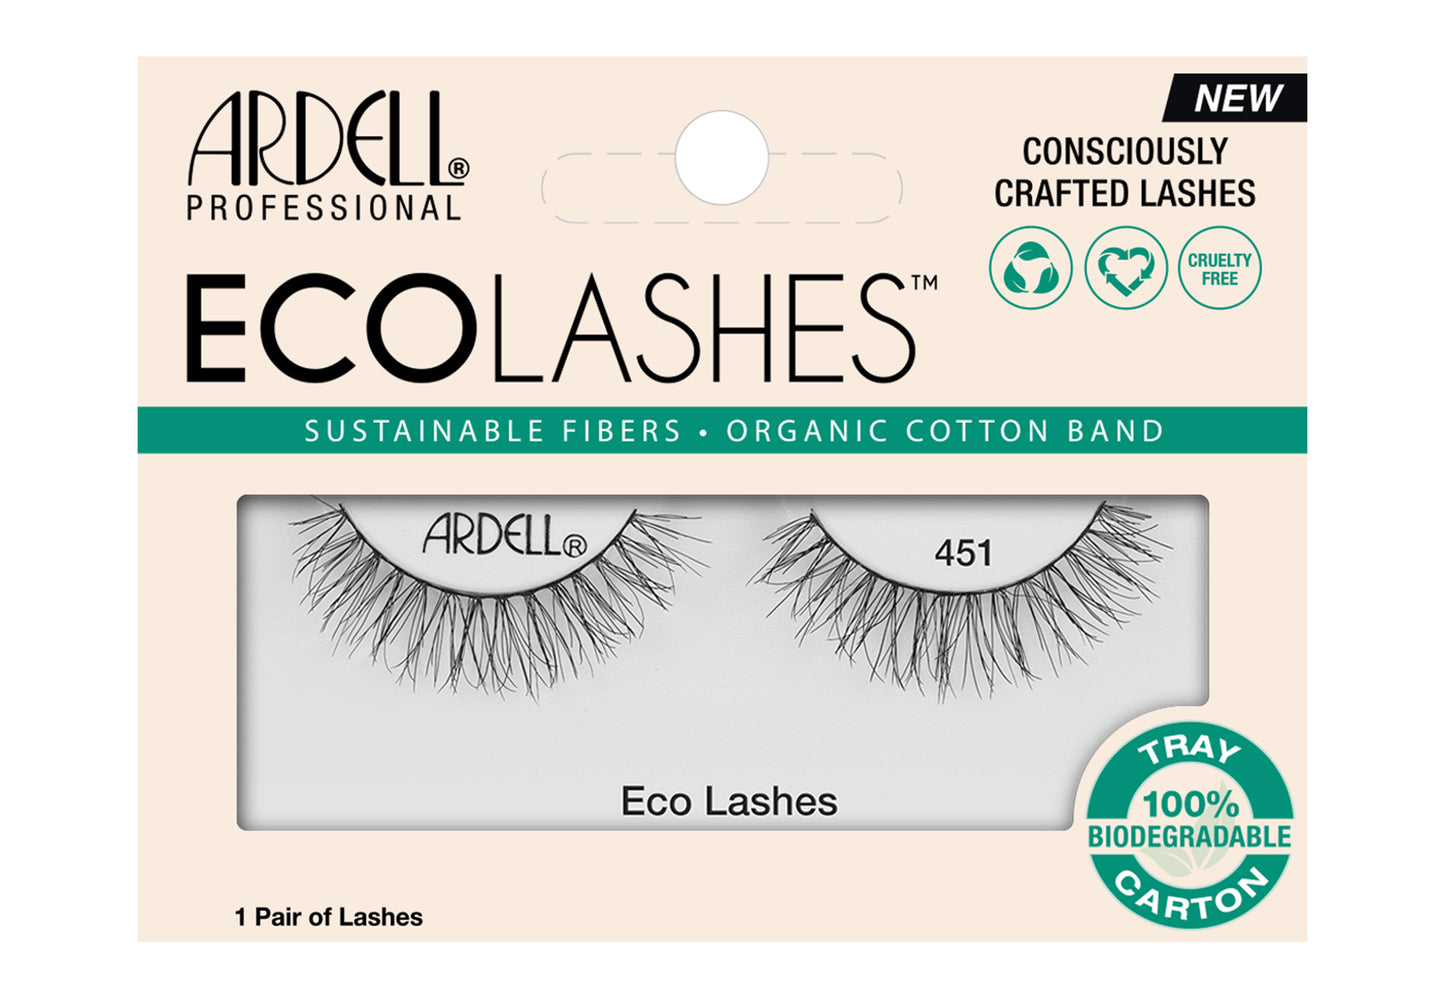 Frontview of a wall-hook ready retail pack of Ardell's Ecolashes 451 with printed label text